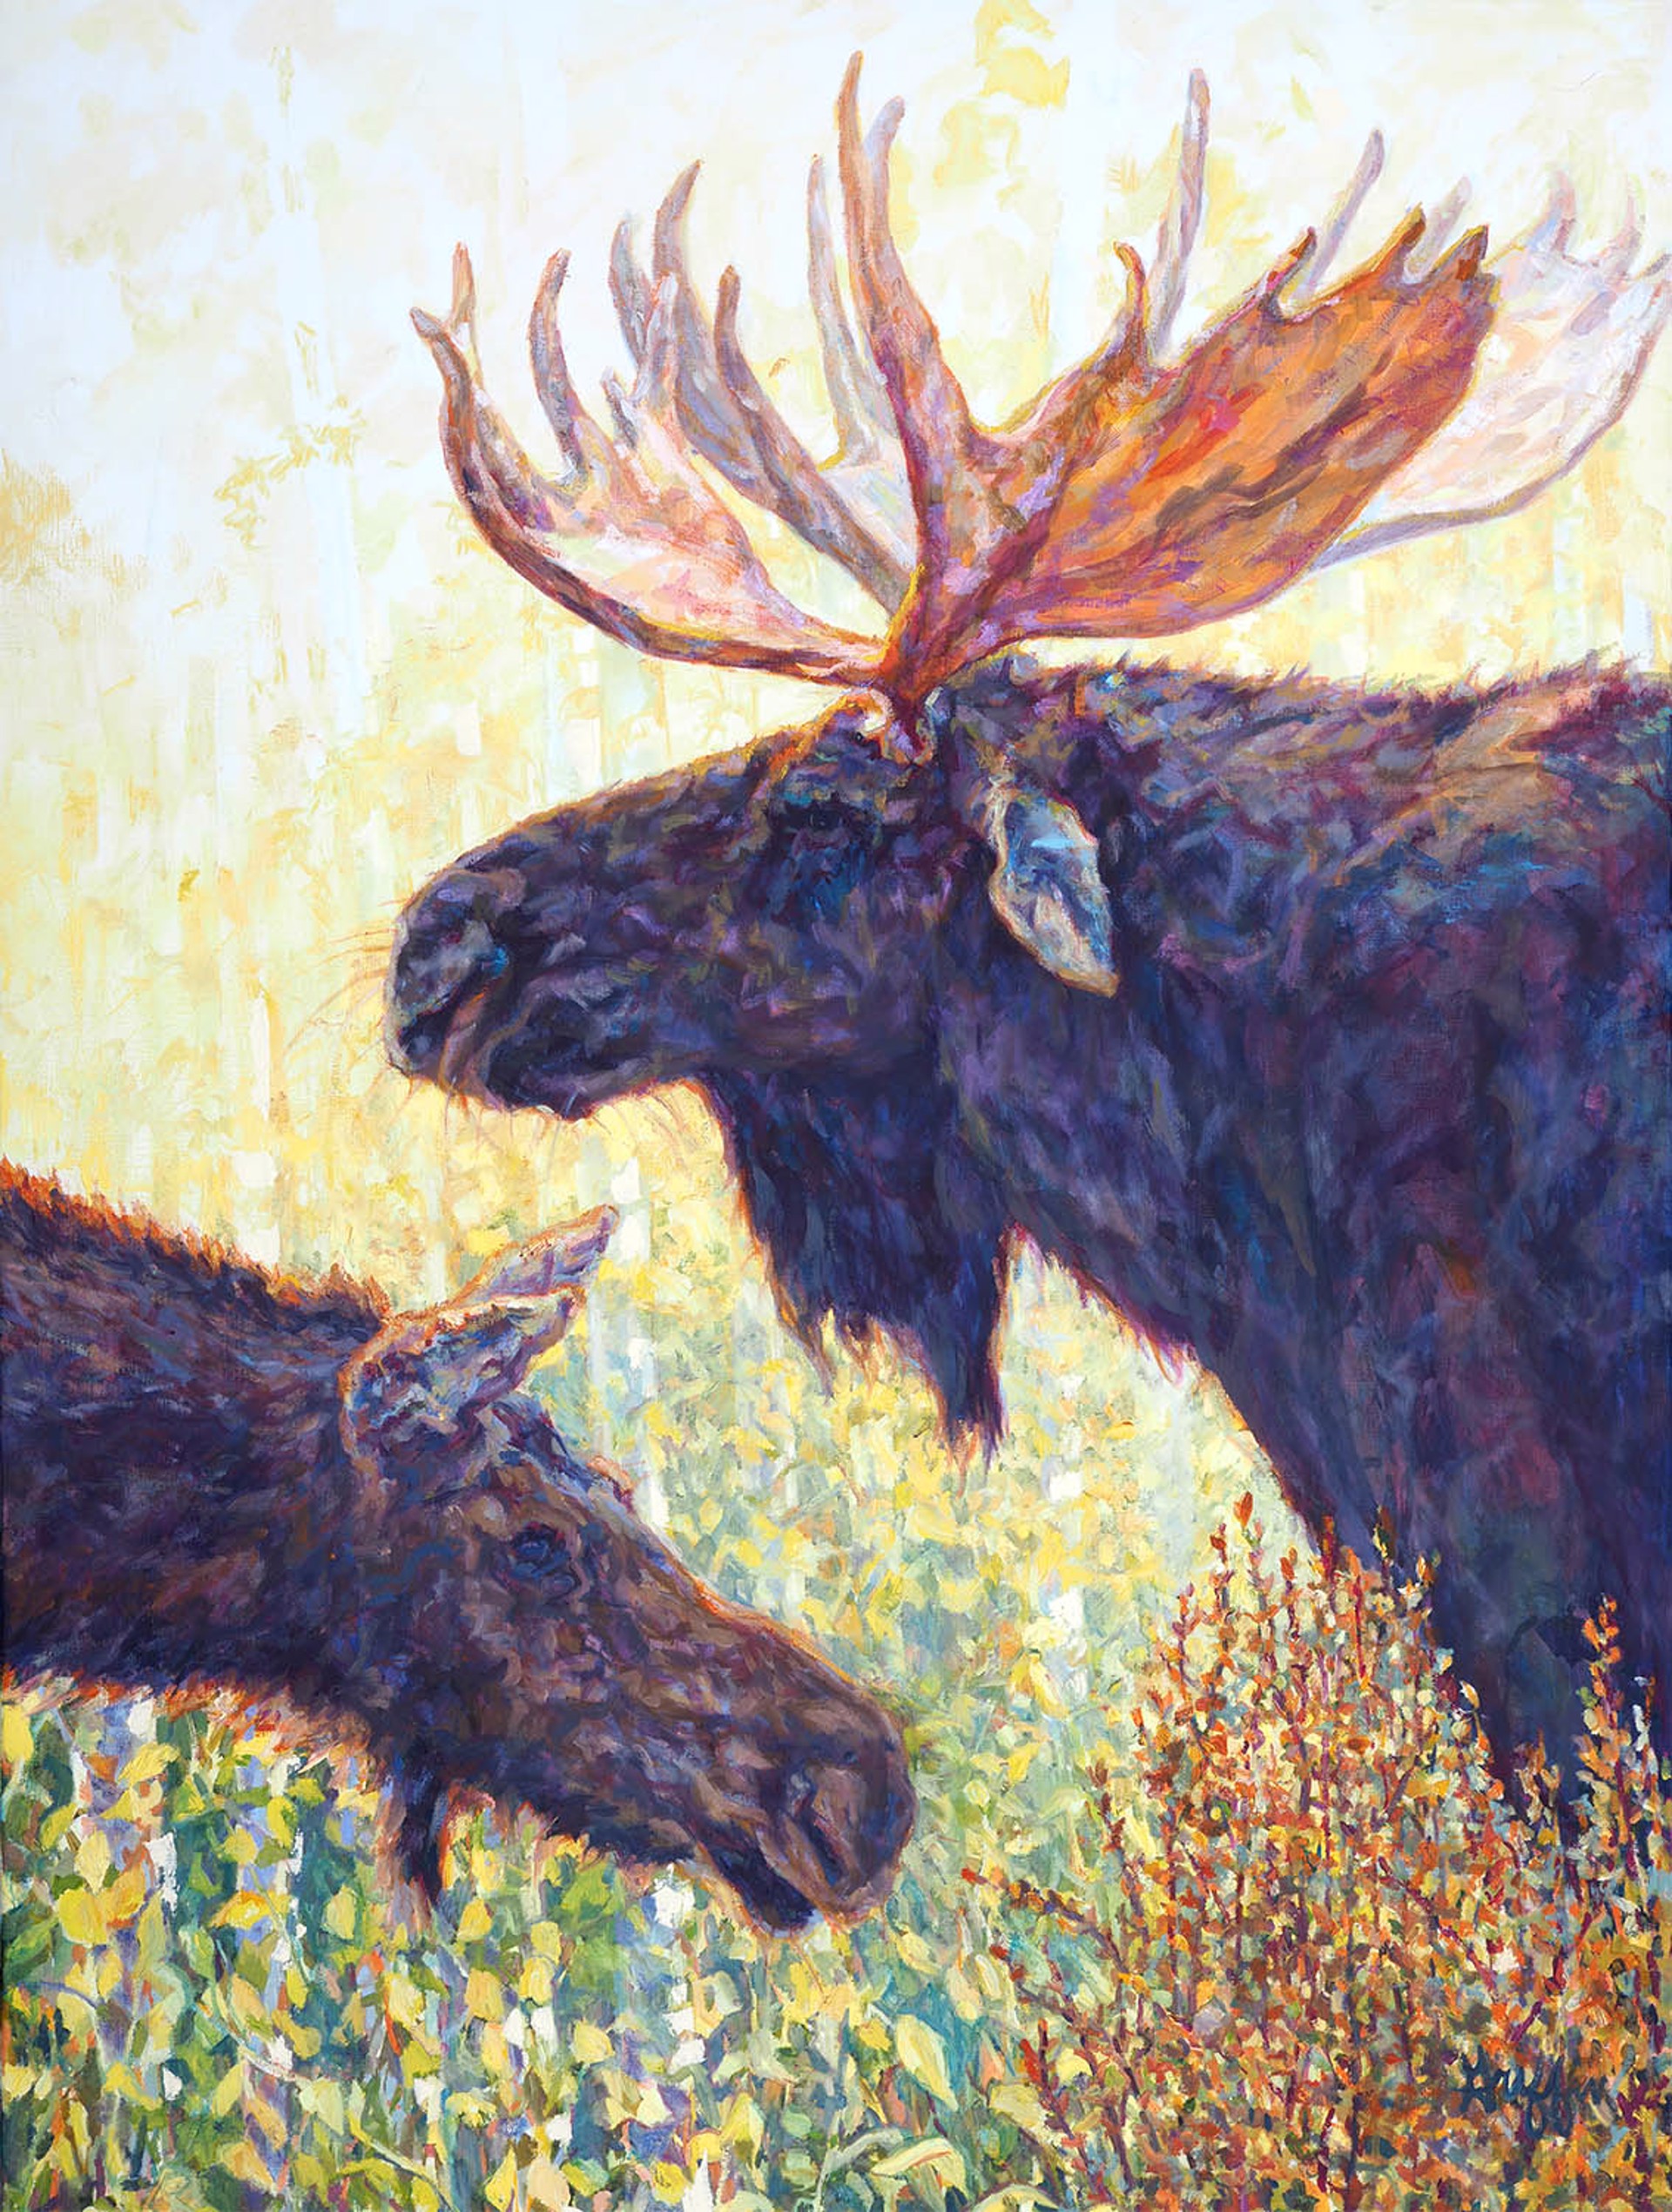 Original Oil Painting On Linen Two Moose Together In Green Leafy Background